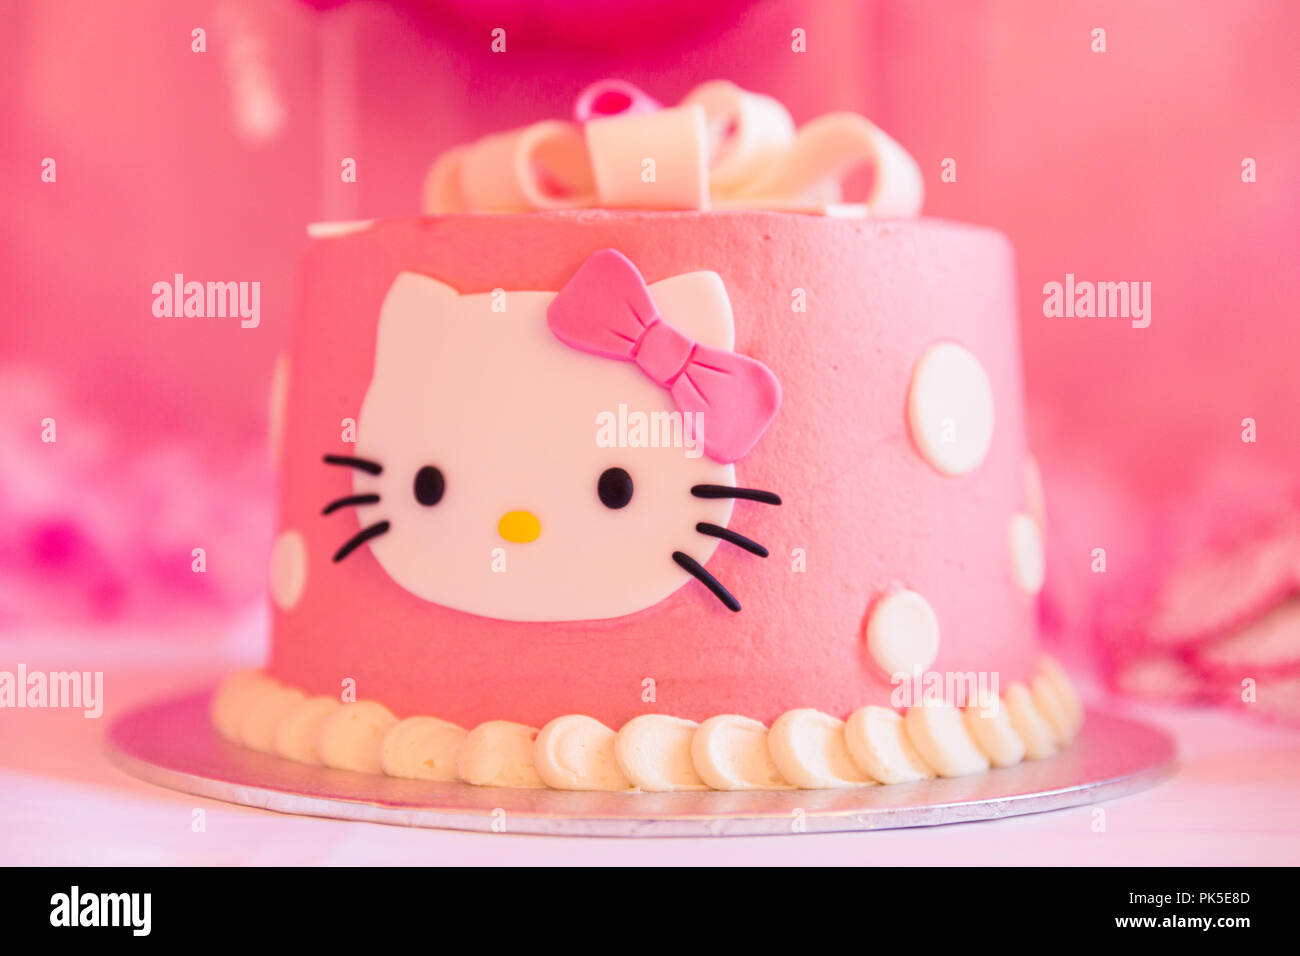 White and Pink Birthday Cake with Cat Head and Blurred Background ...